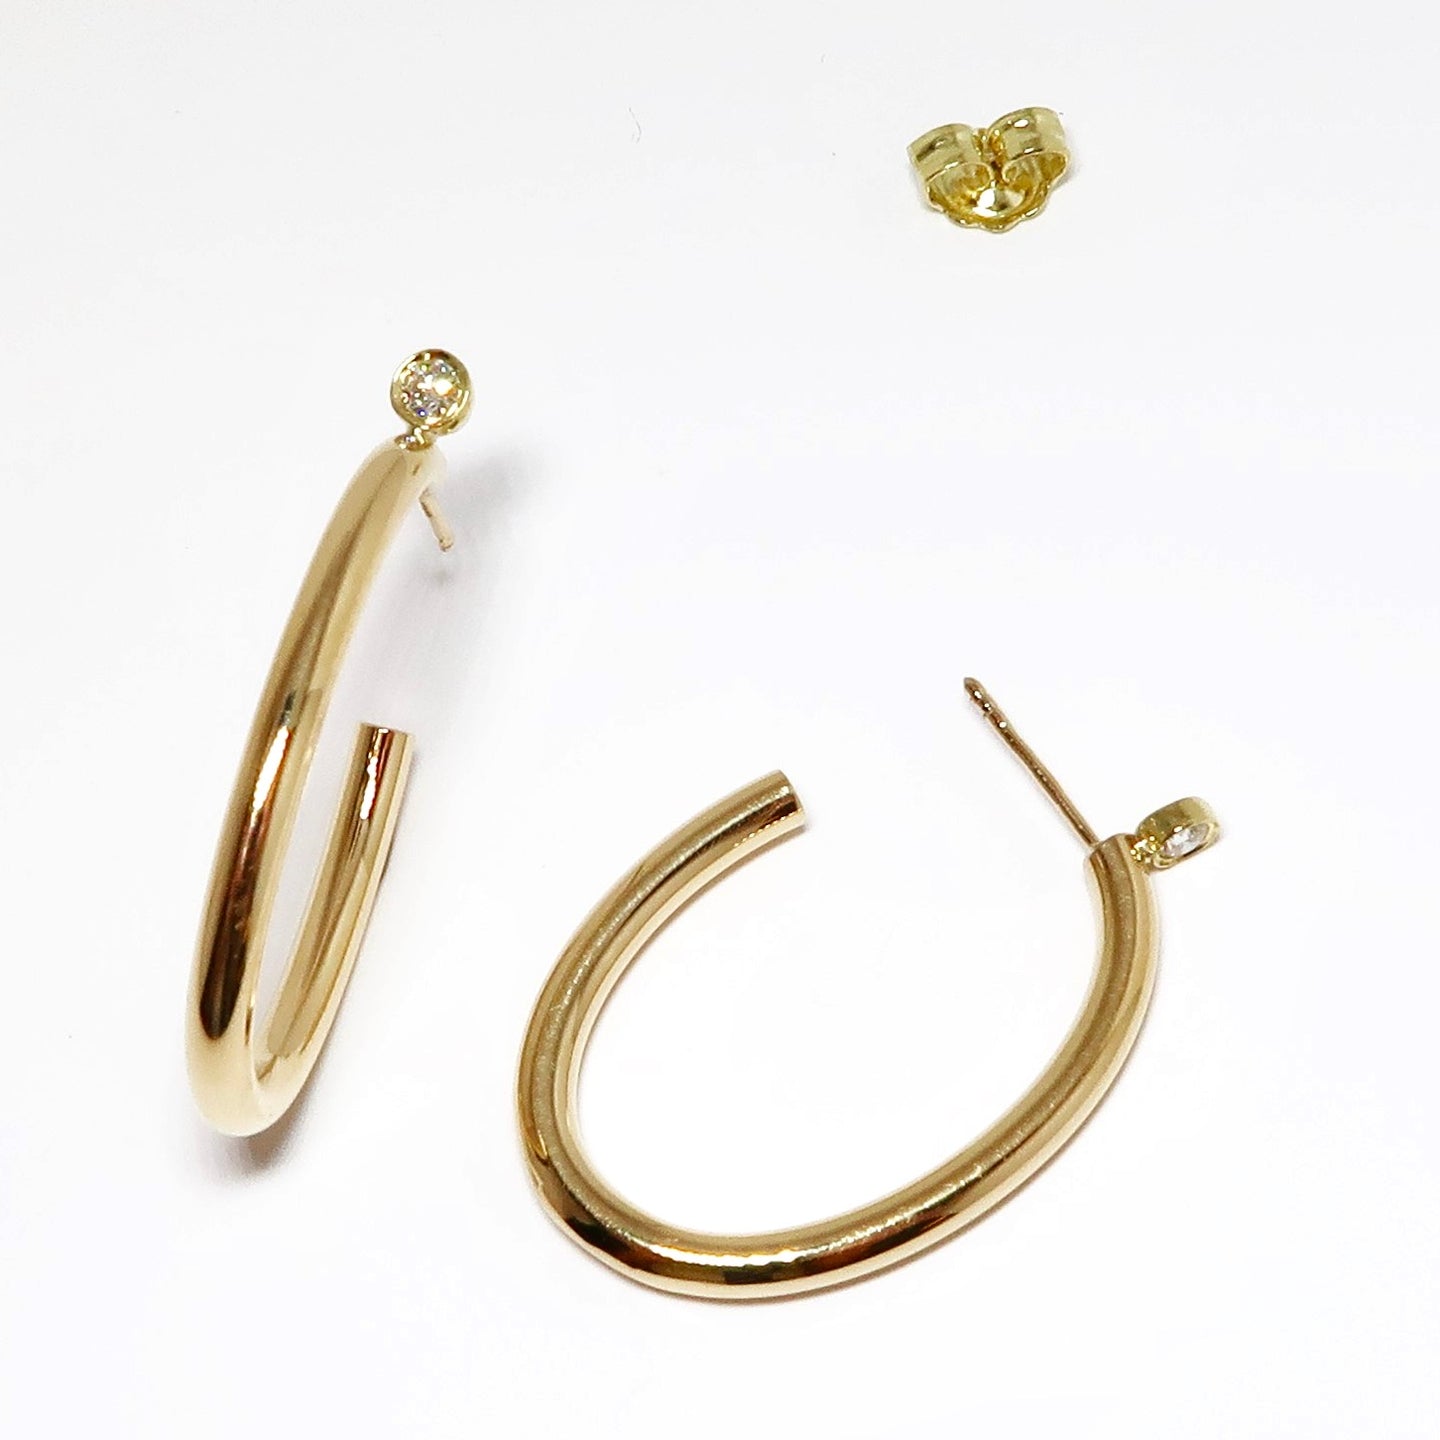 18k Yellow Gold Oval Hoop Earrings with Diamond at Post